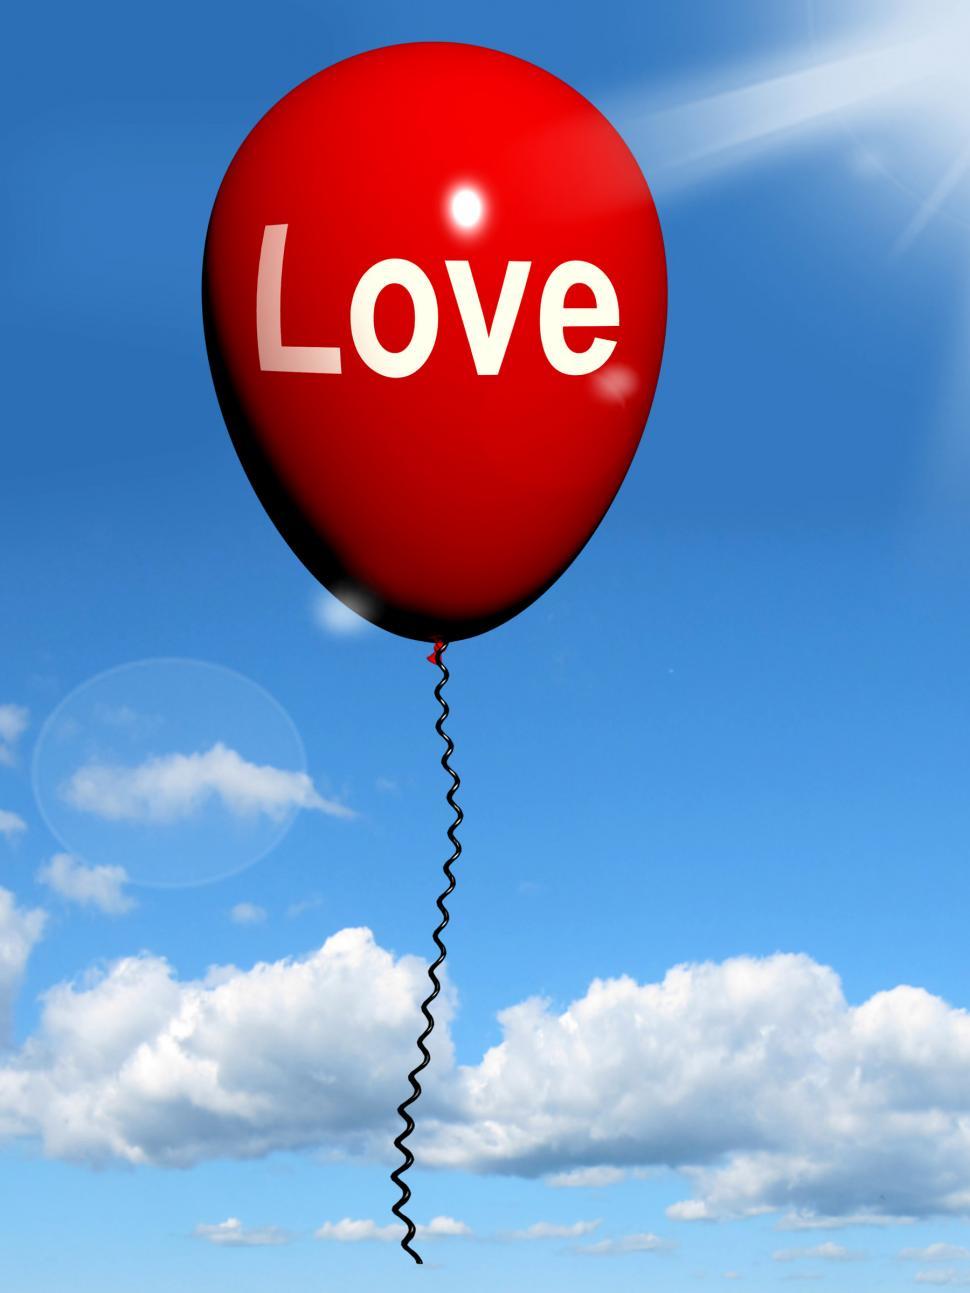 Free Image of Love Balloon Shows Fondness and Affectionate Feelings 